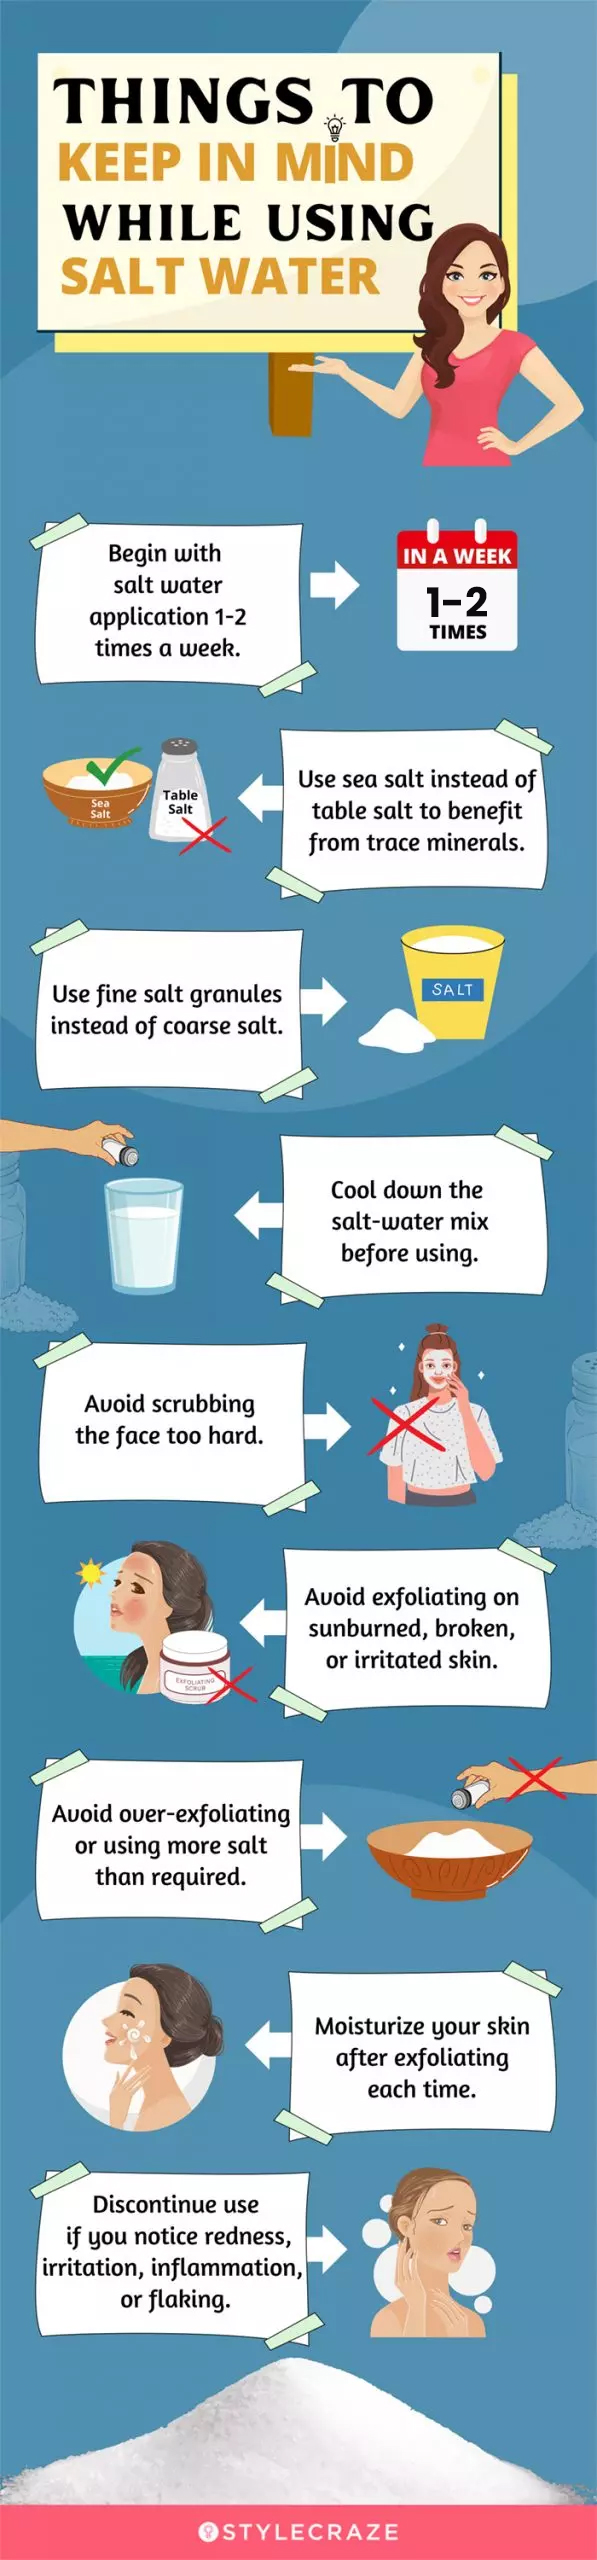 things to keep in mind while using salt water (infographic)